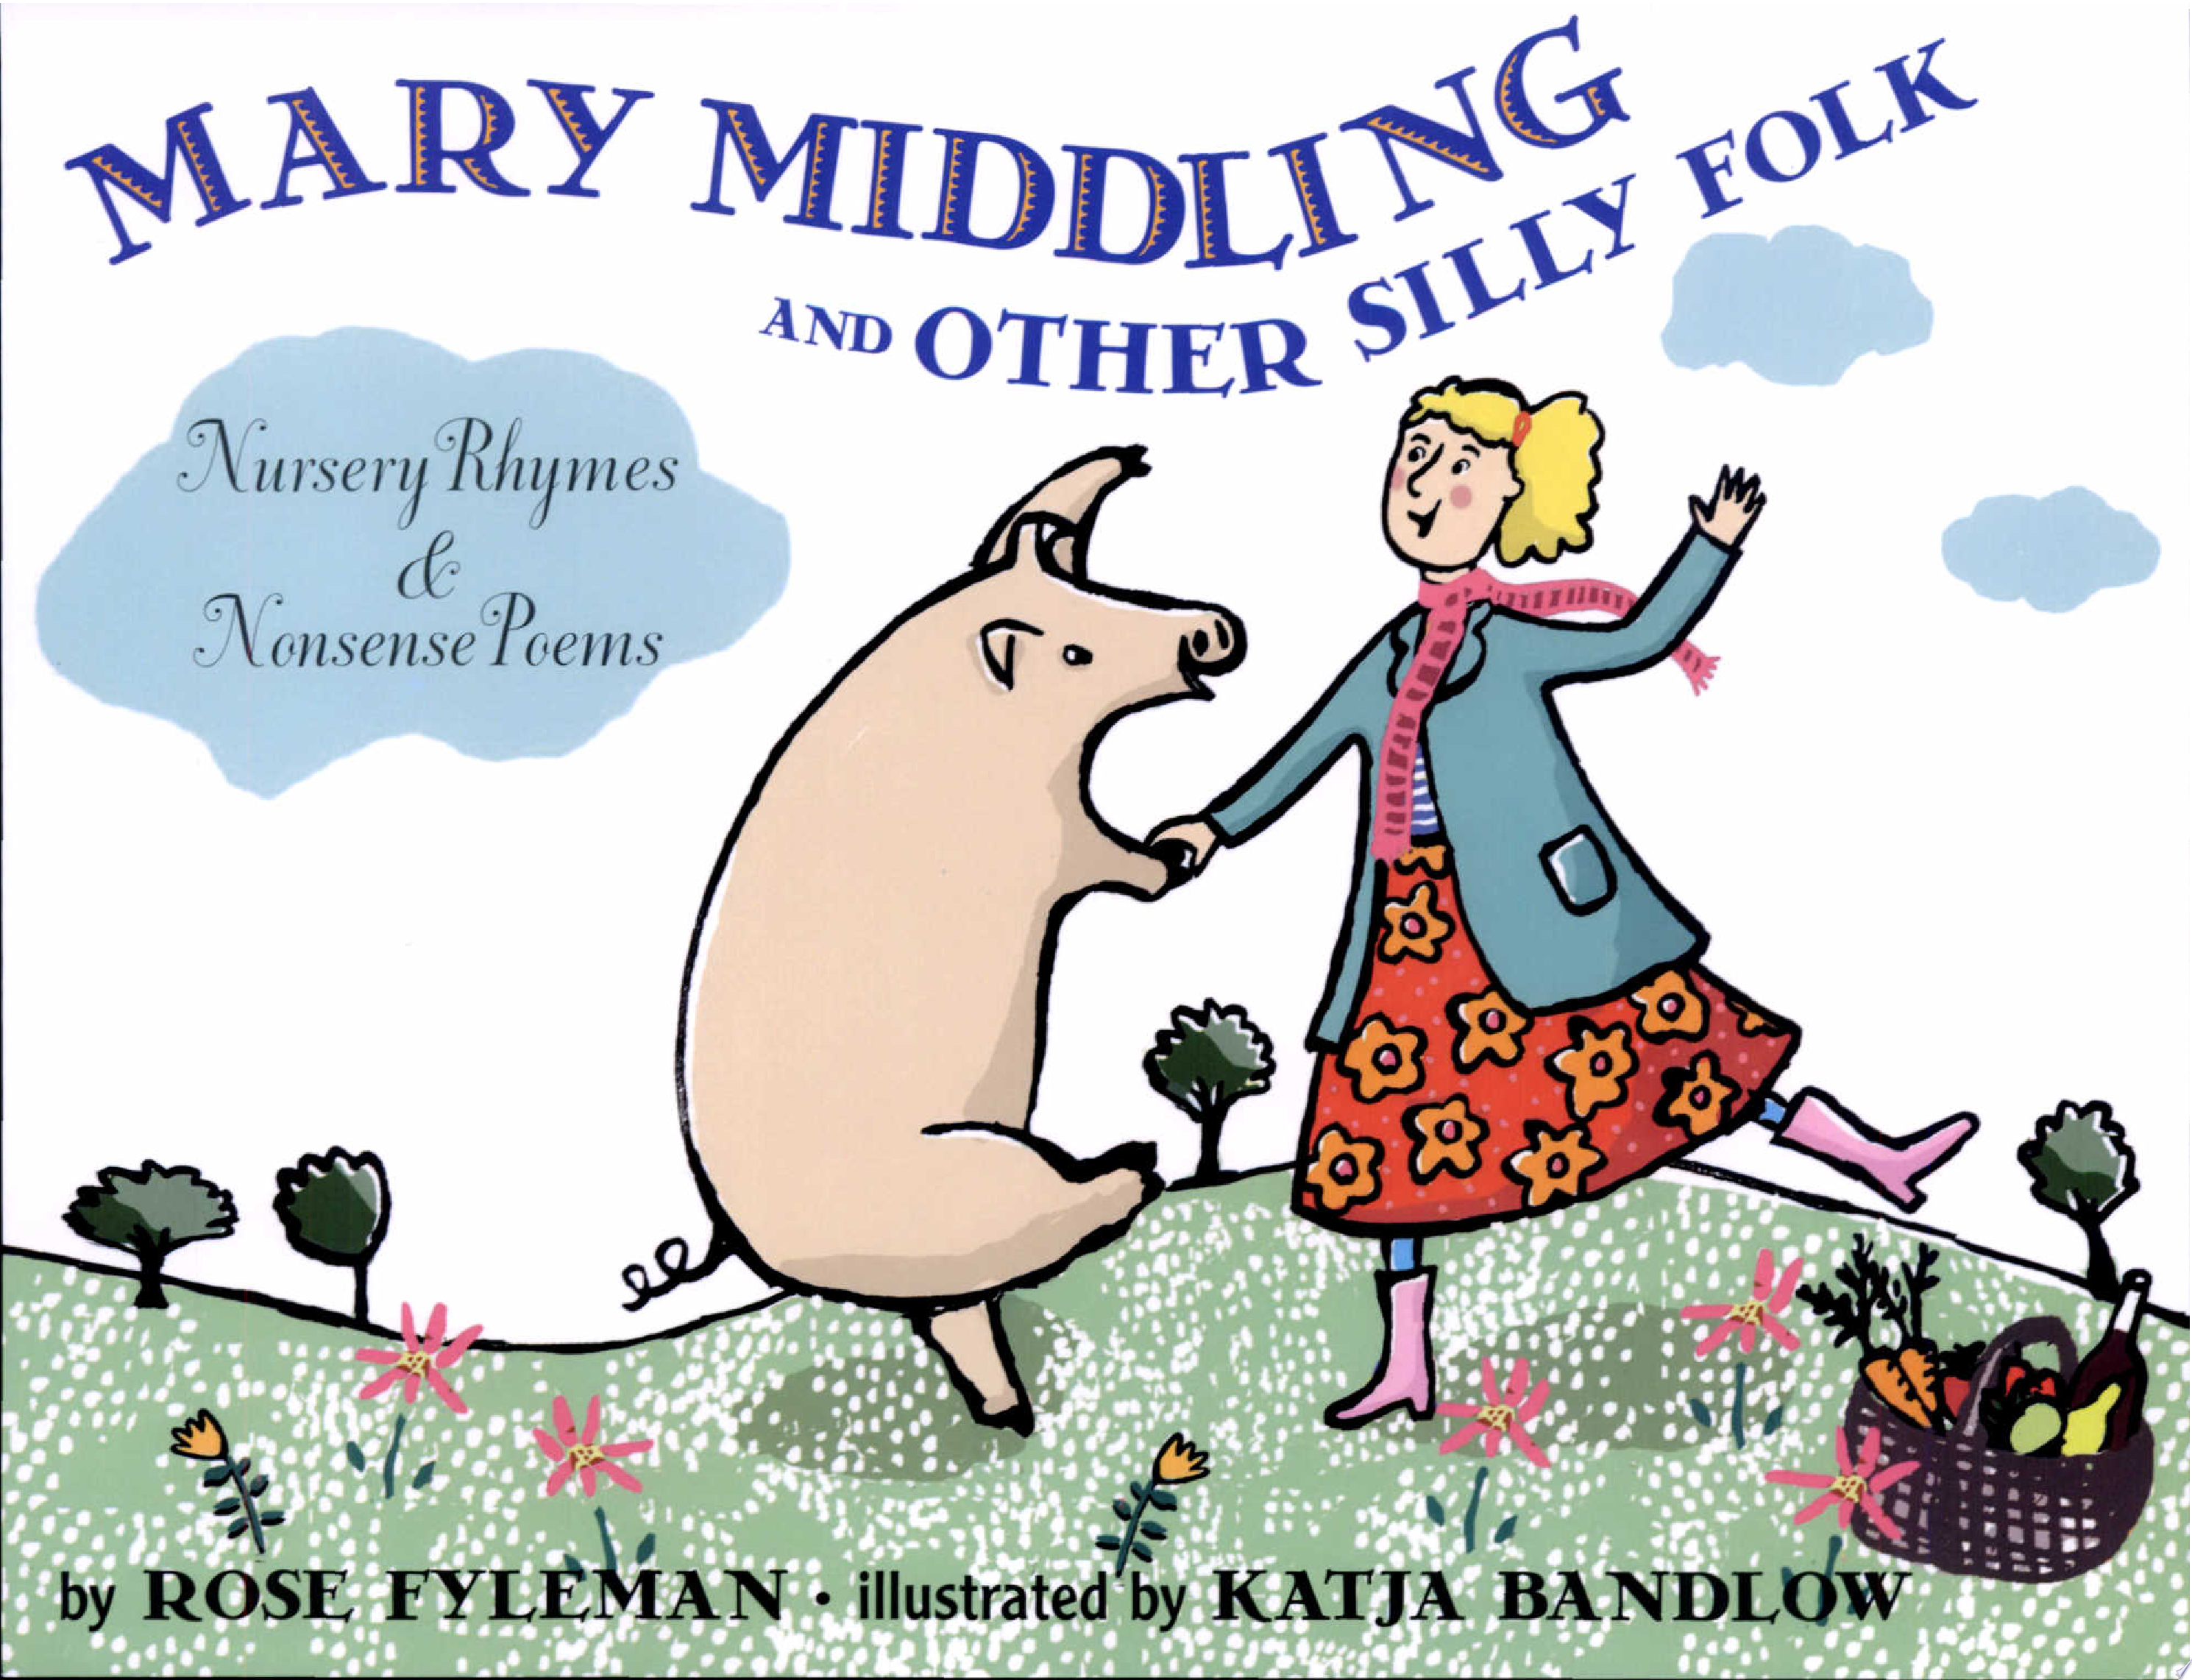 Image for "Mary Middling and Other Silly Folk"